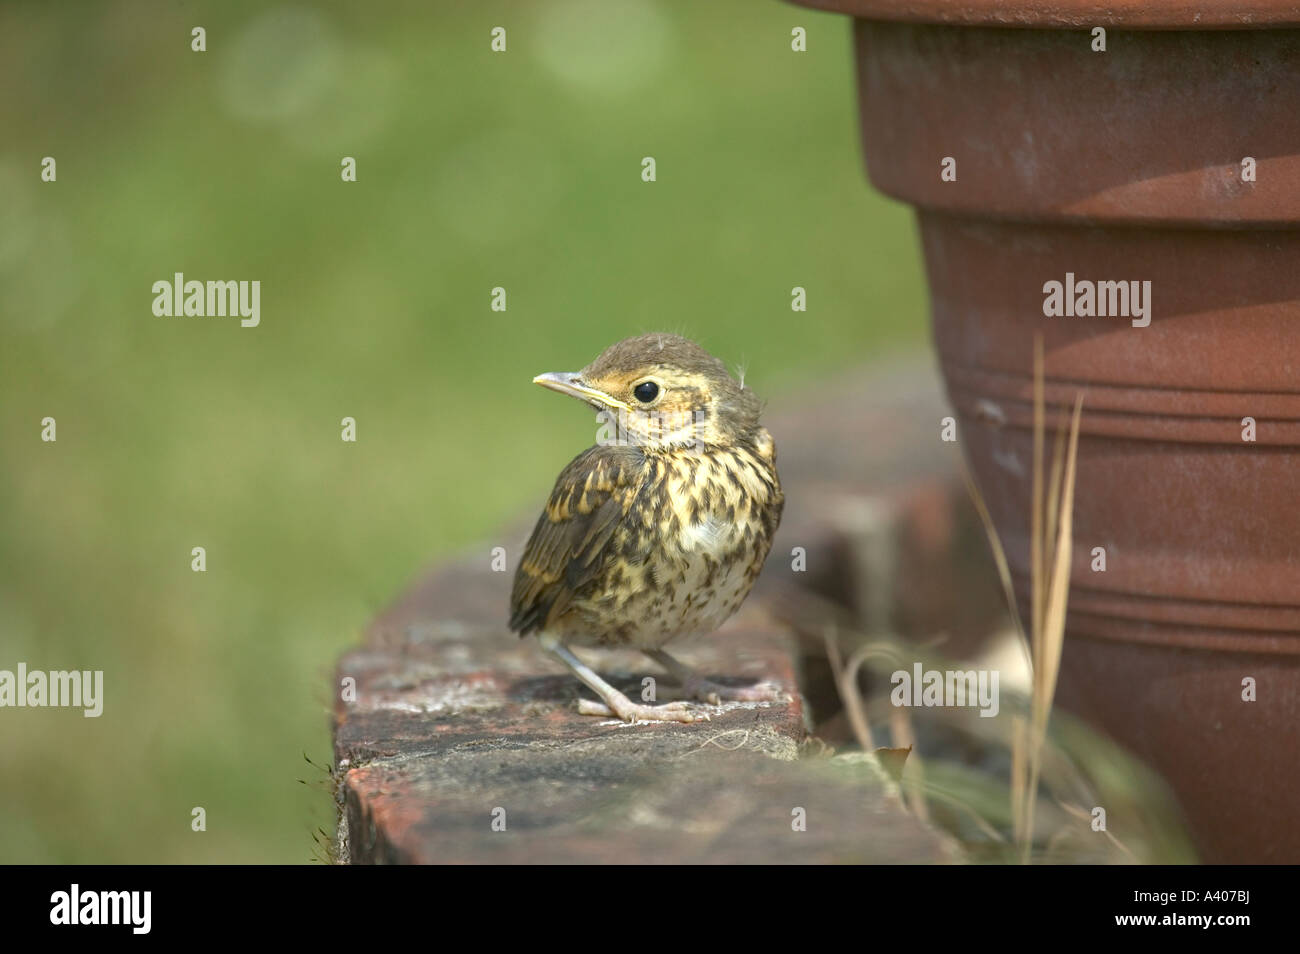 A song thrush chick on an old brick wall Stock Photo